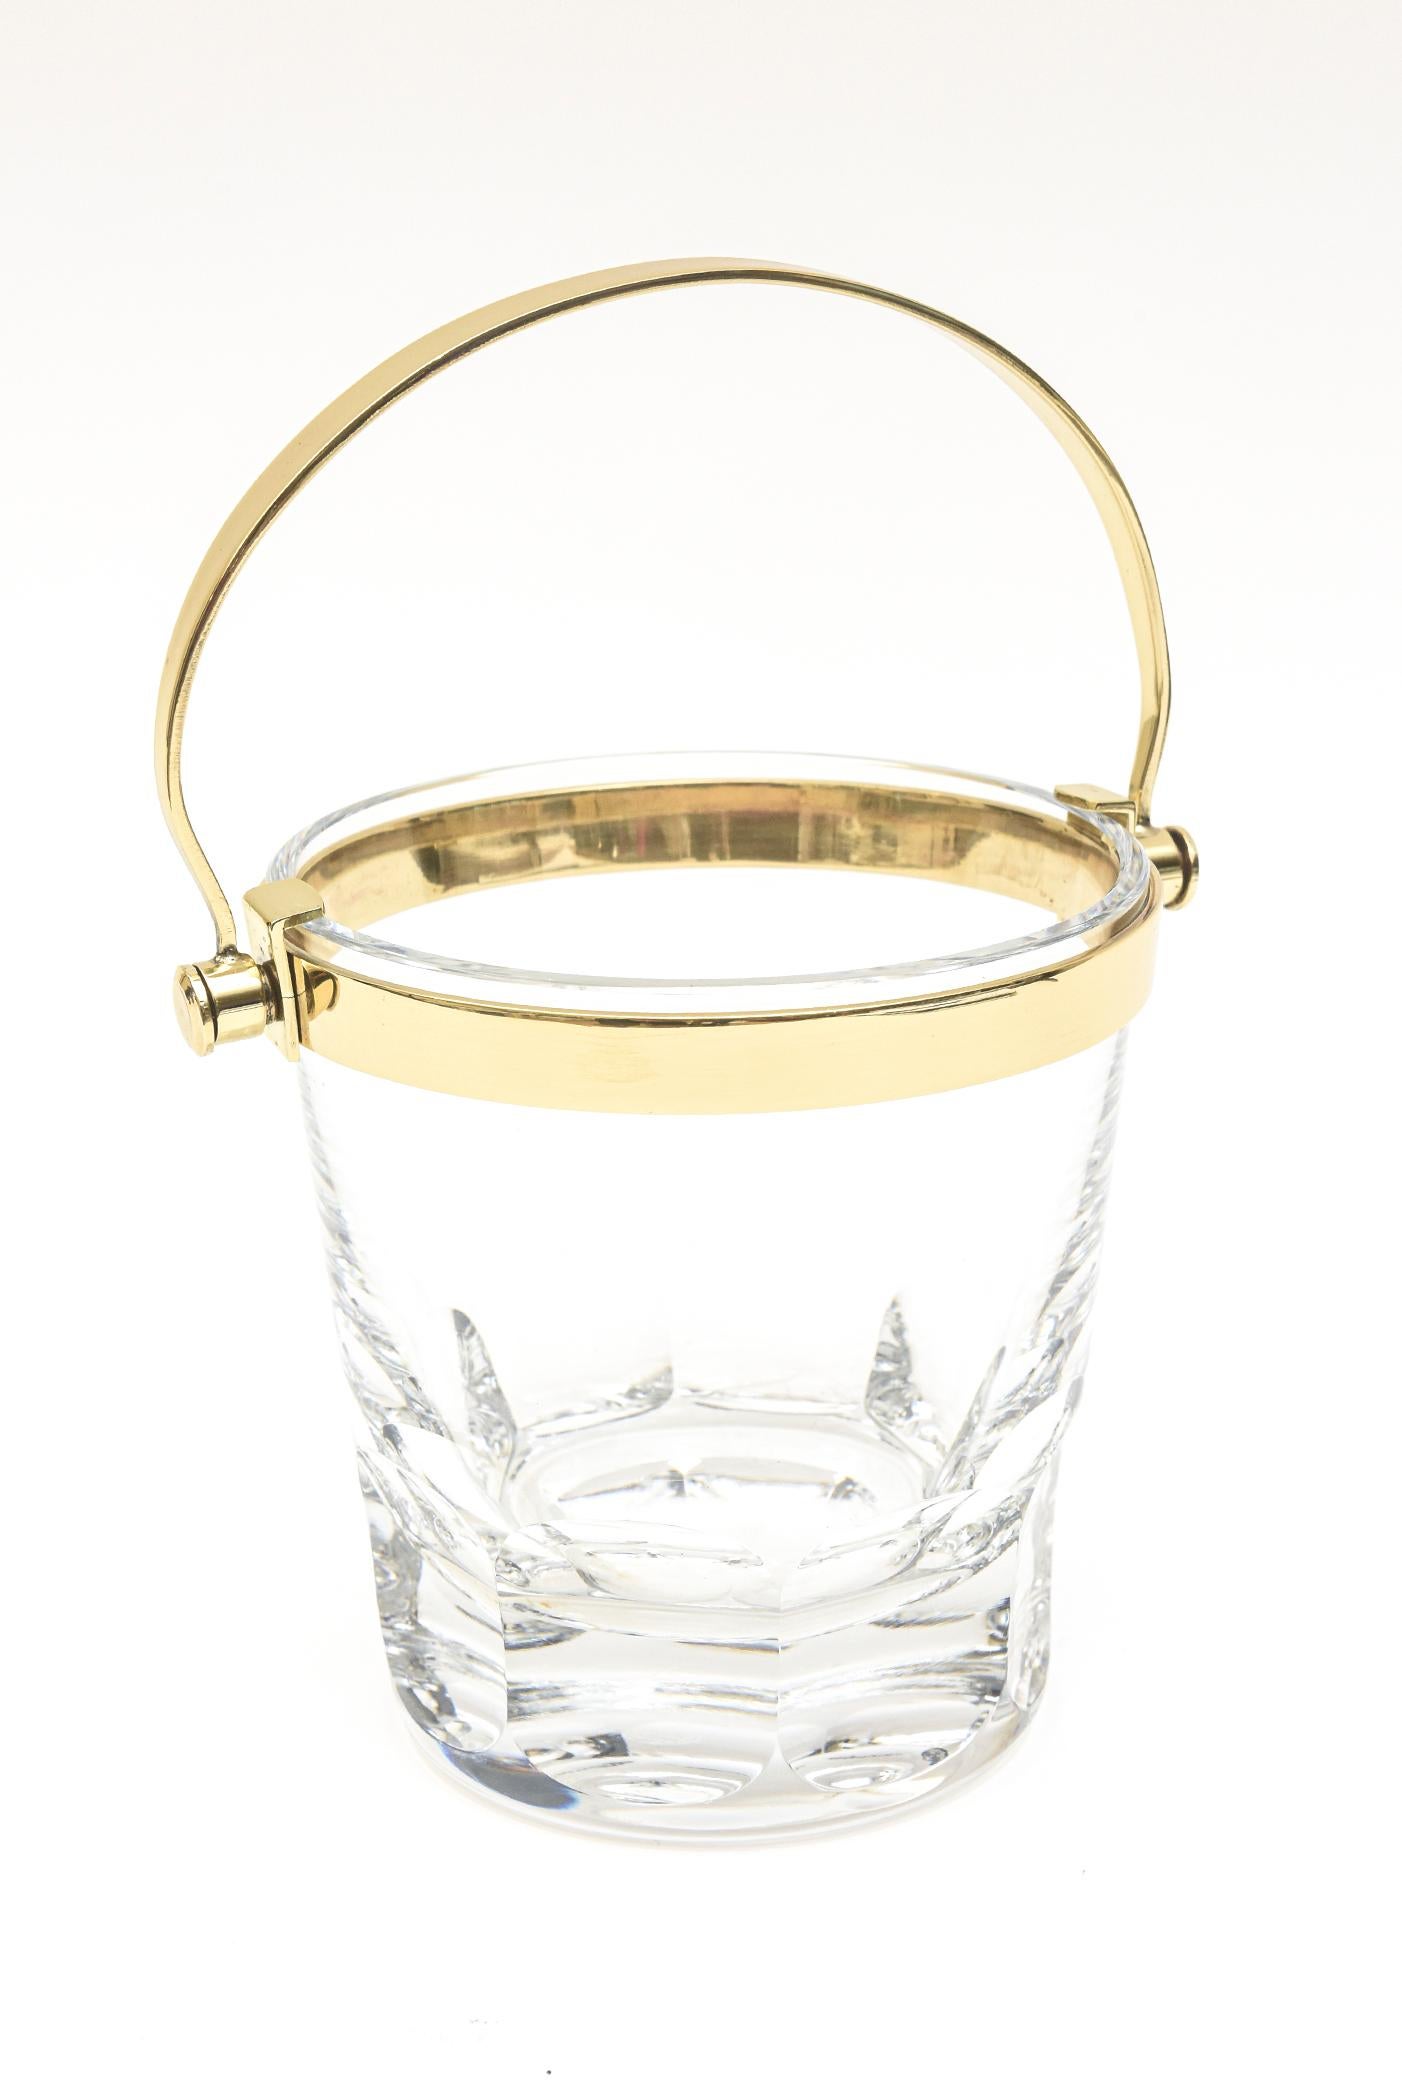 This lovely timeless hallmarked vintage Baccarat crystal and brass small ice bucket is modernist. It is from the 1960s. The cut block crystal at the bottom adds dimension. All of the brass armature has been polished and cleaned. To the top of the